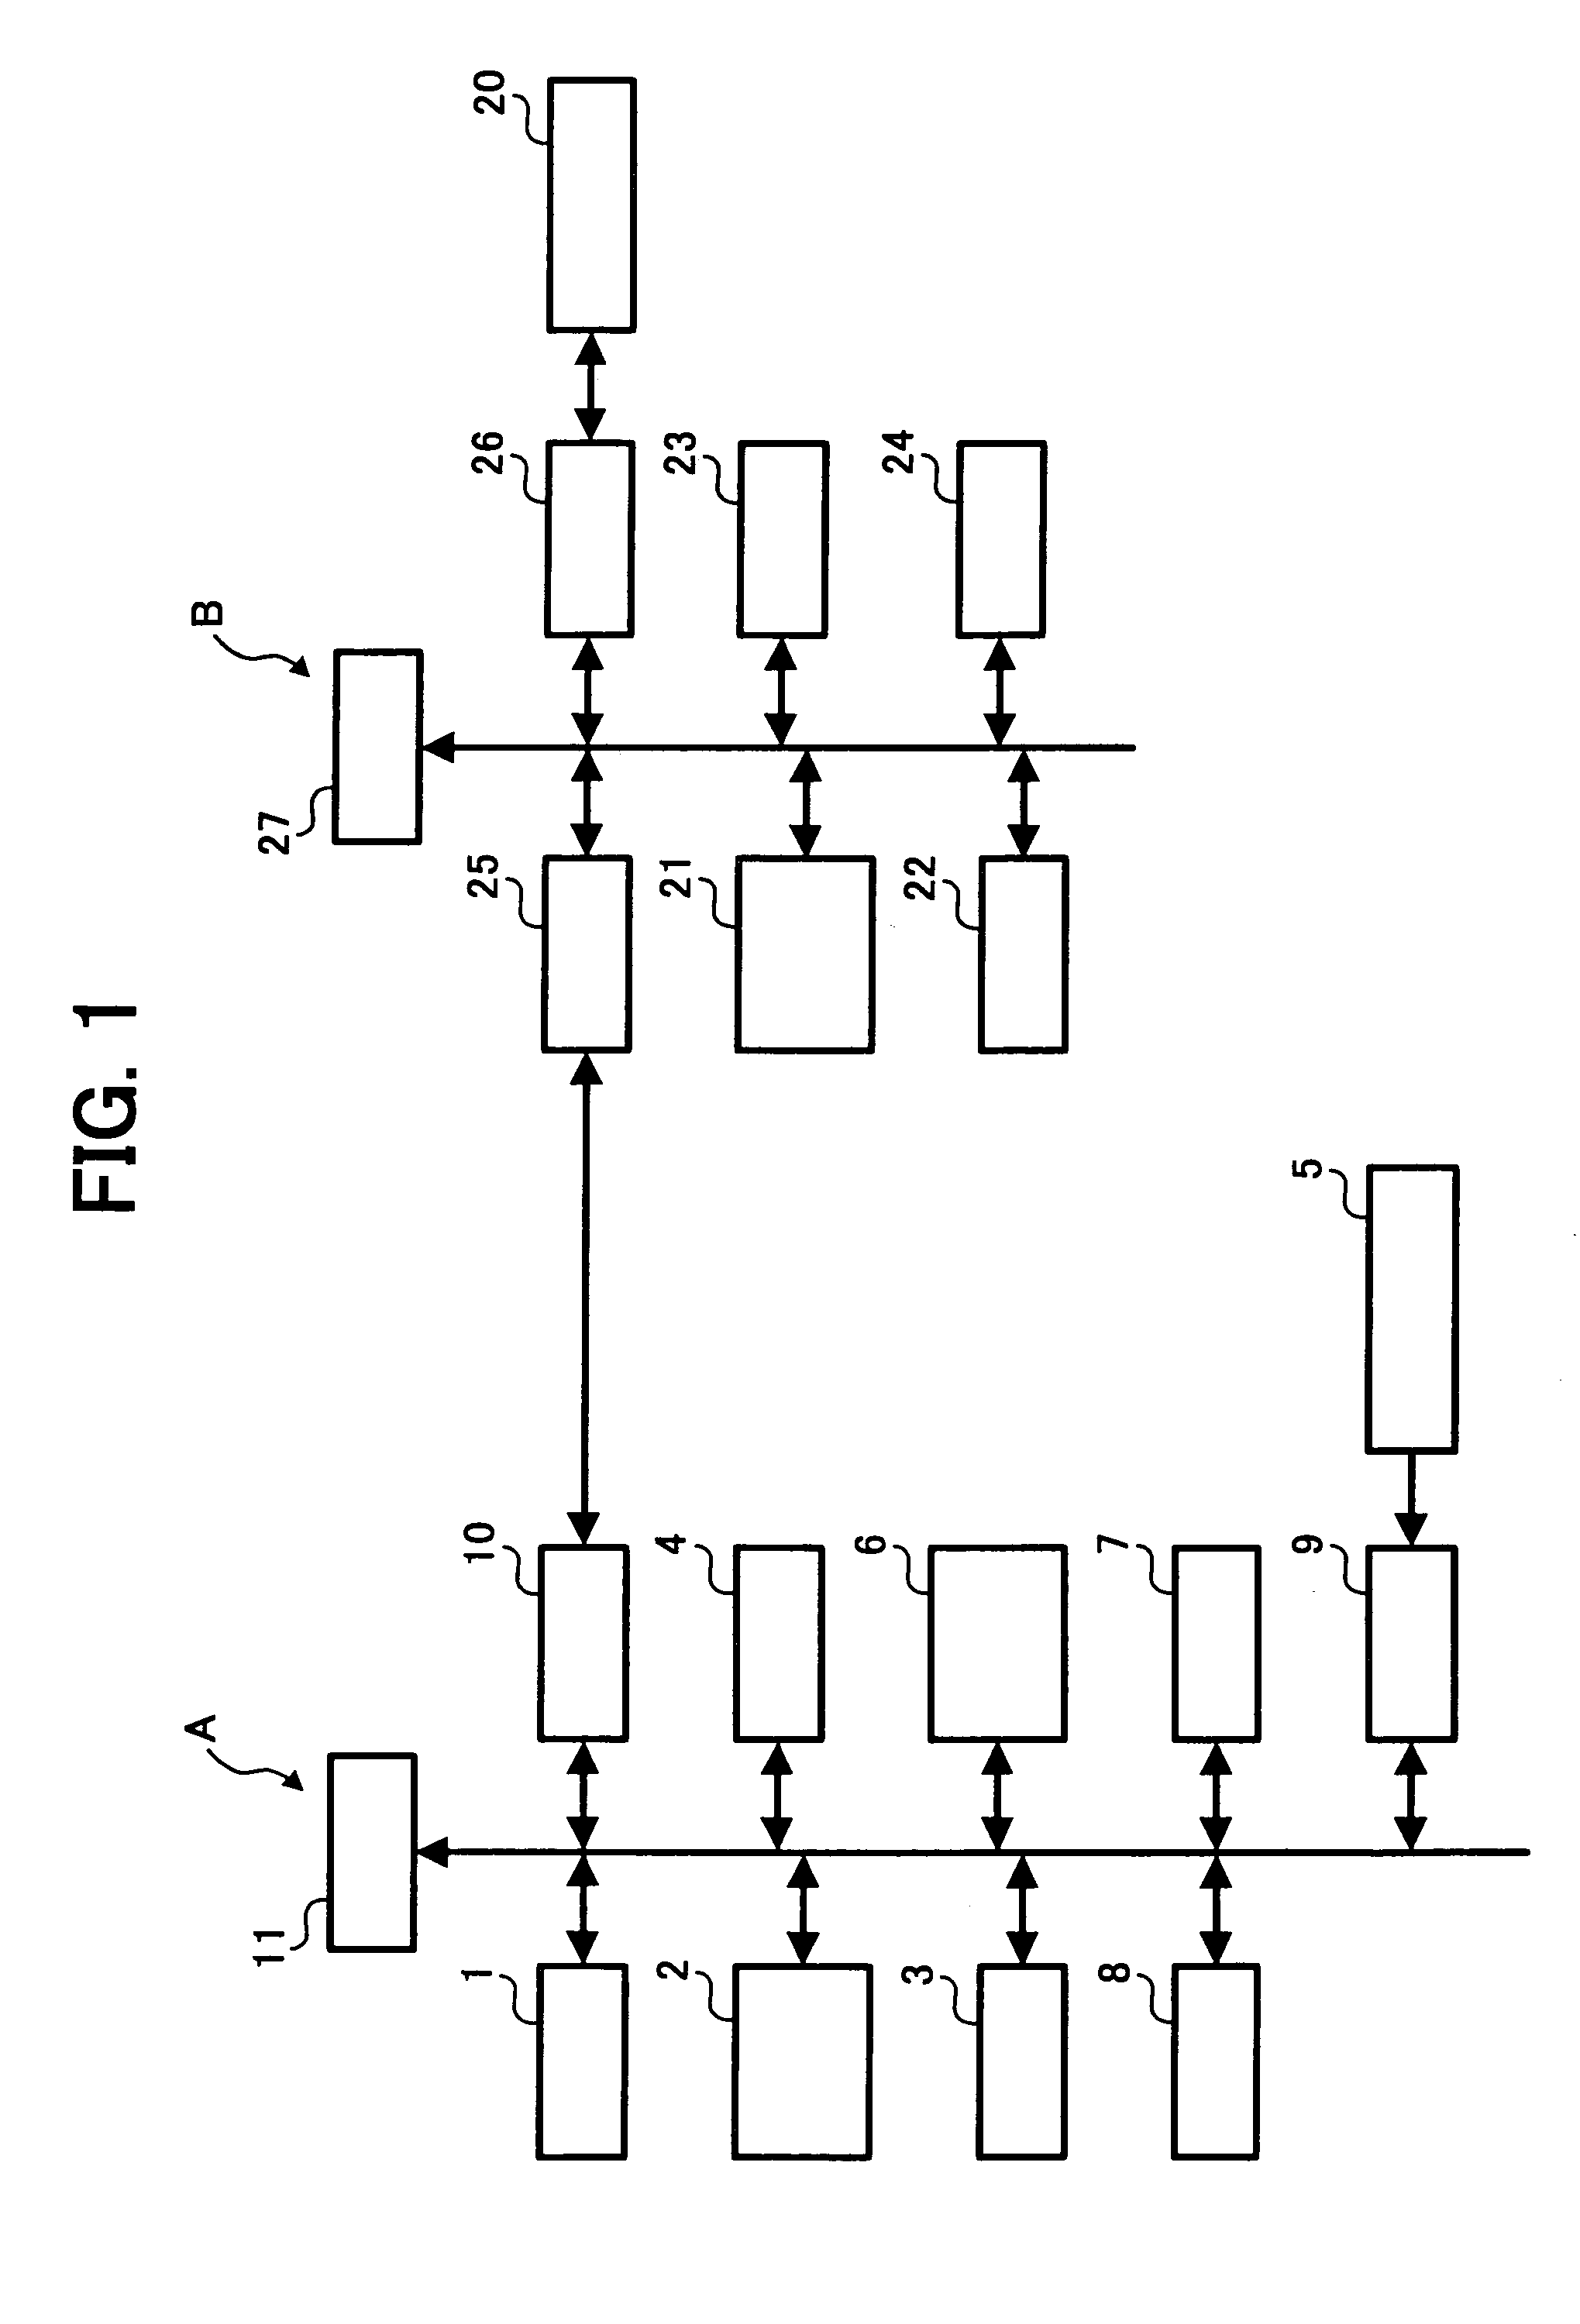 Control system for image file